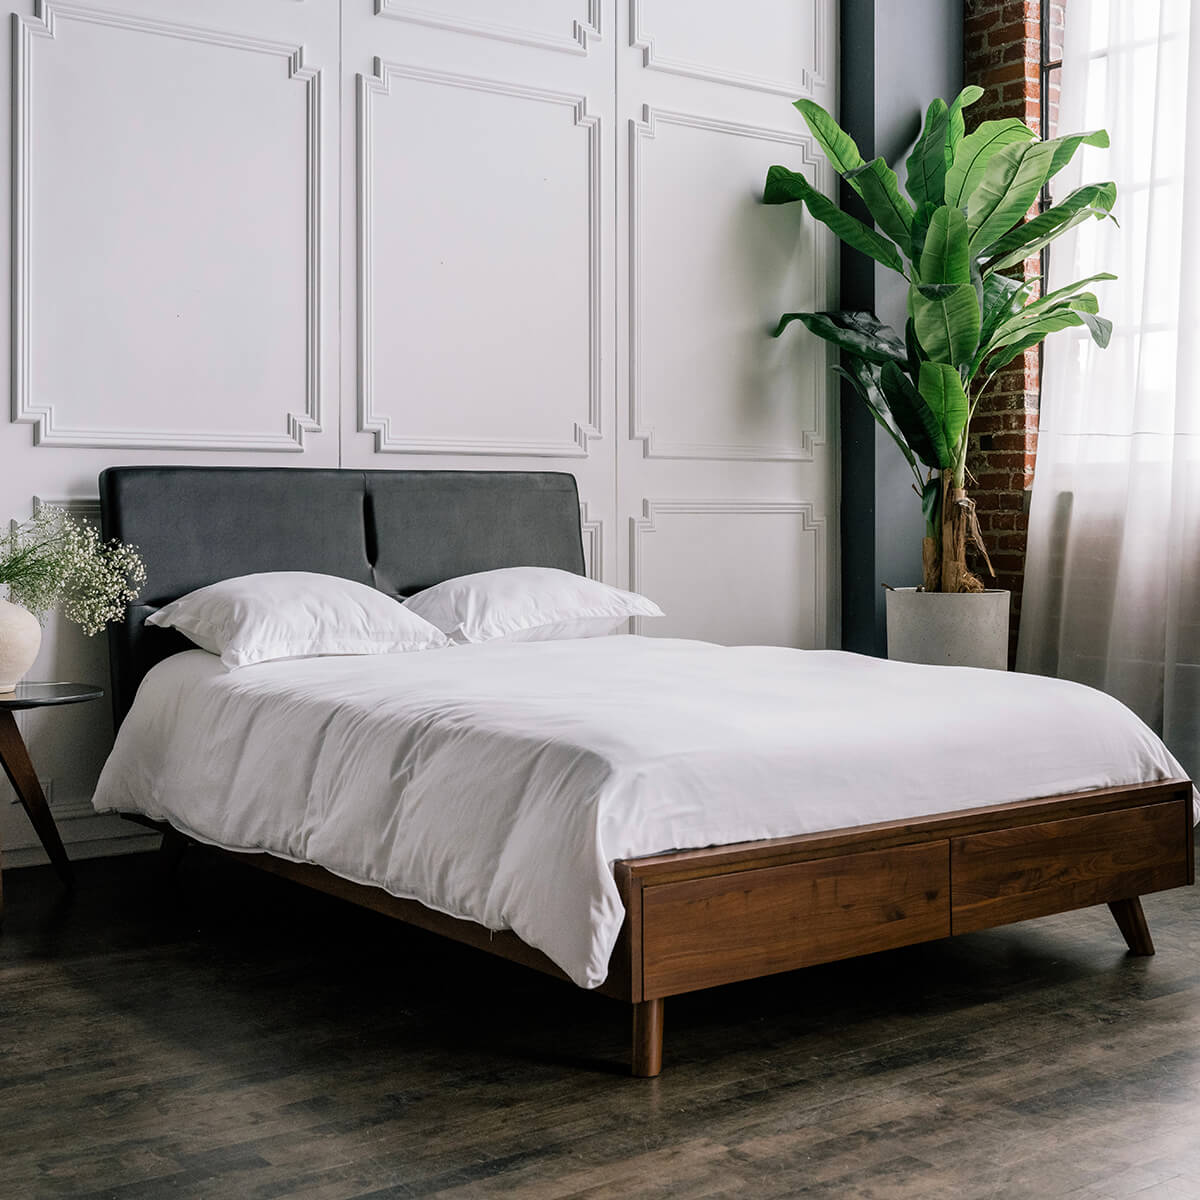 Mim Concept best Modern furniture stores in Toronto, Ottawa and Mississauga to sell modern contemporary bedroom furniture and condo furniture. Italian leather headboard bed Low profile platform storage bed solid walnut wood